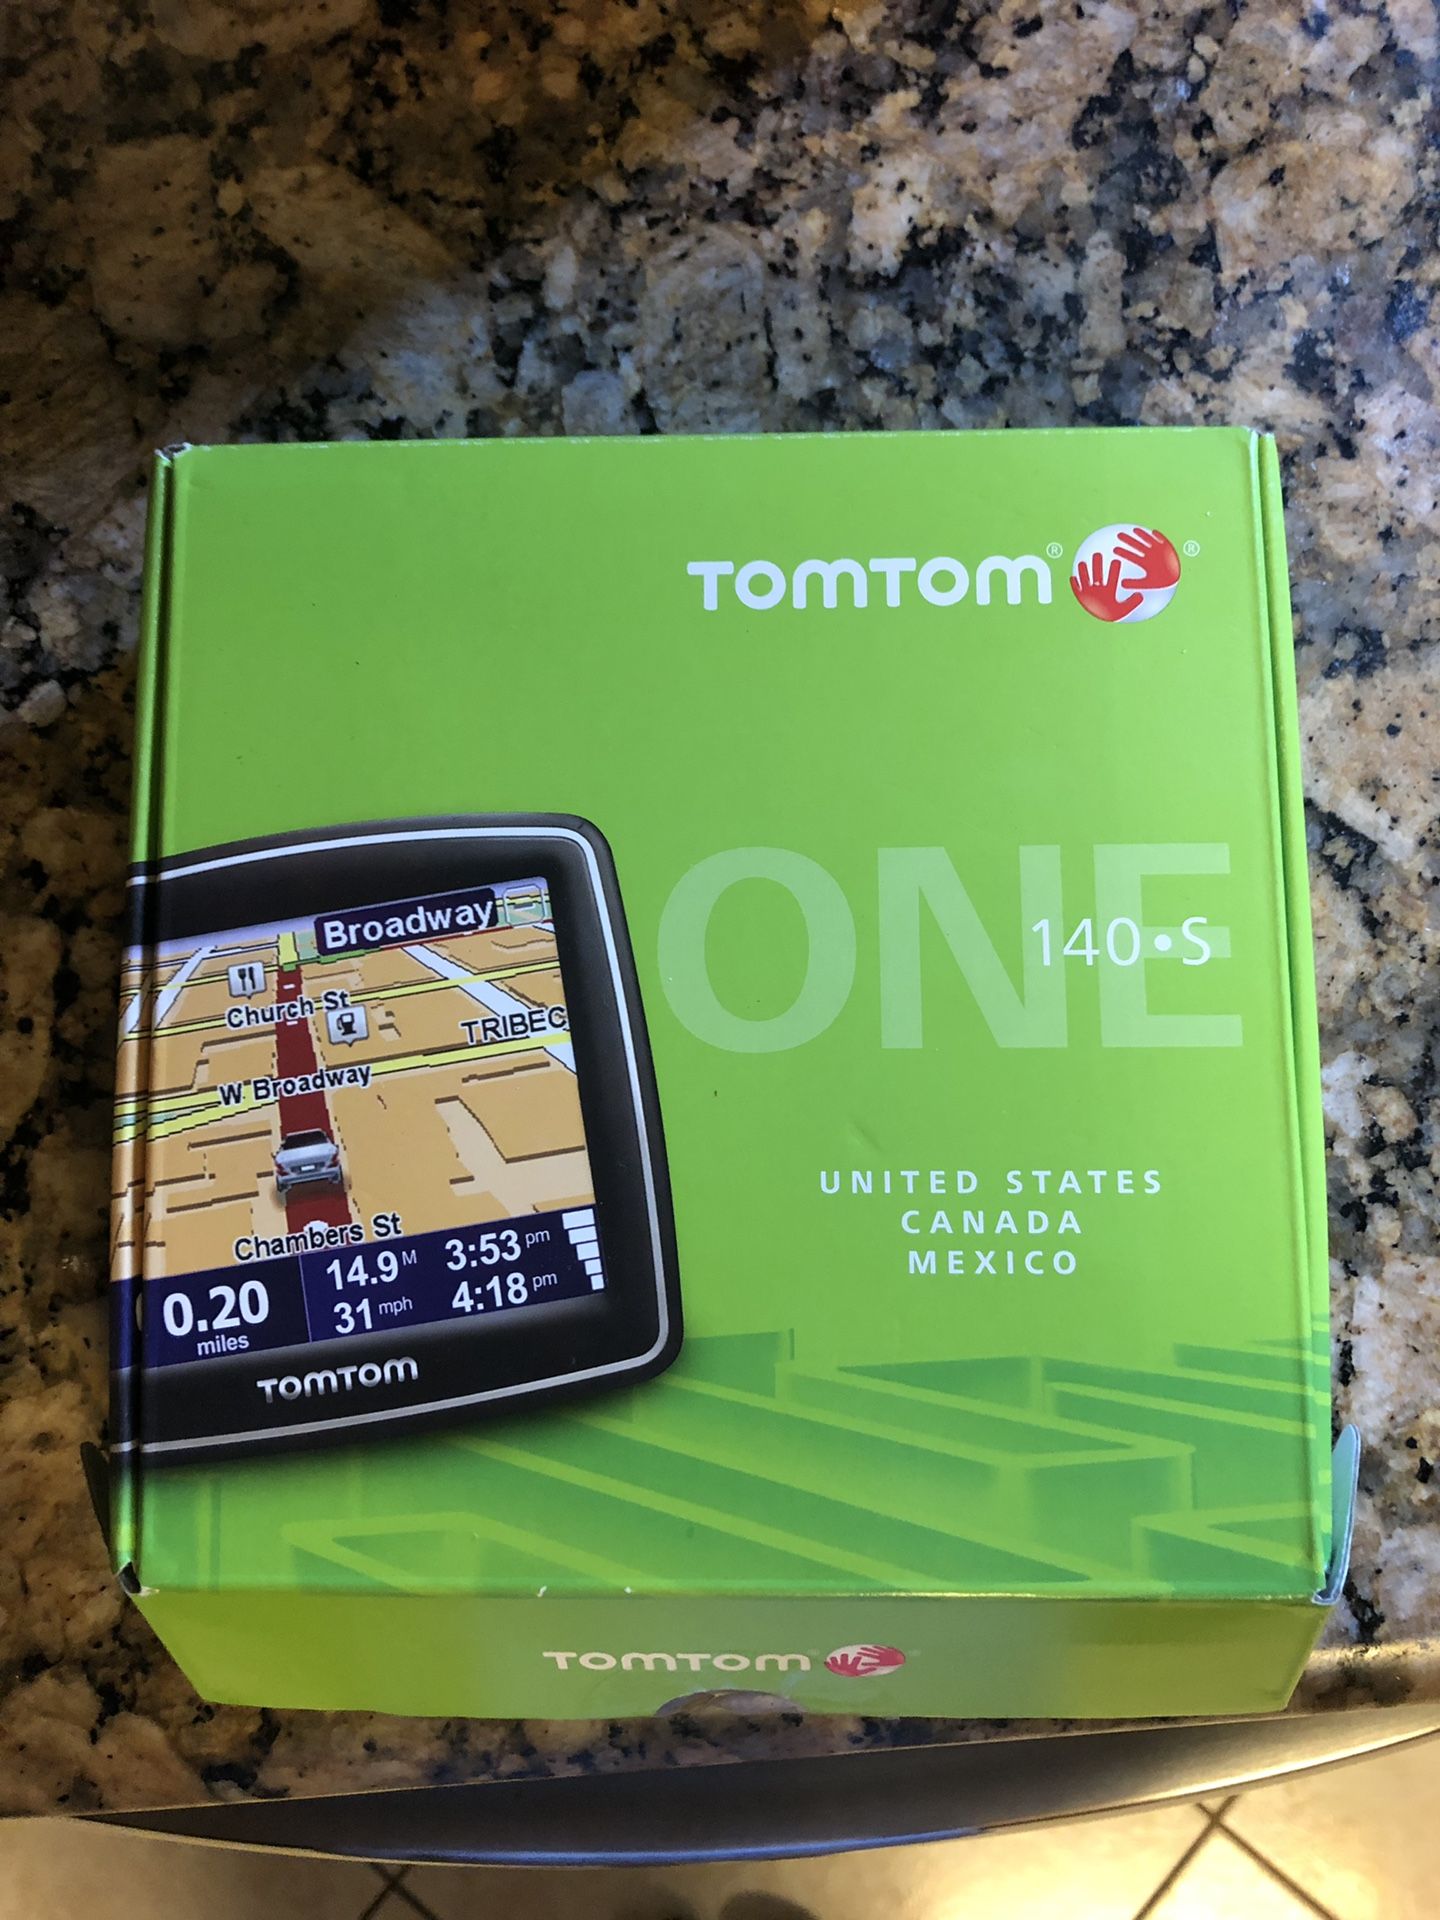 TomTom 140 s -US - Canada - Mexico